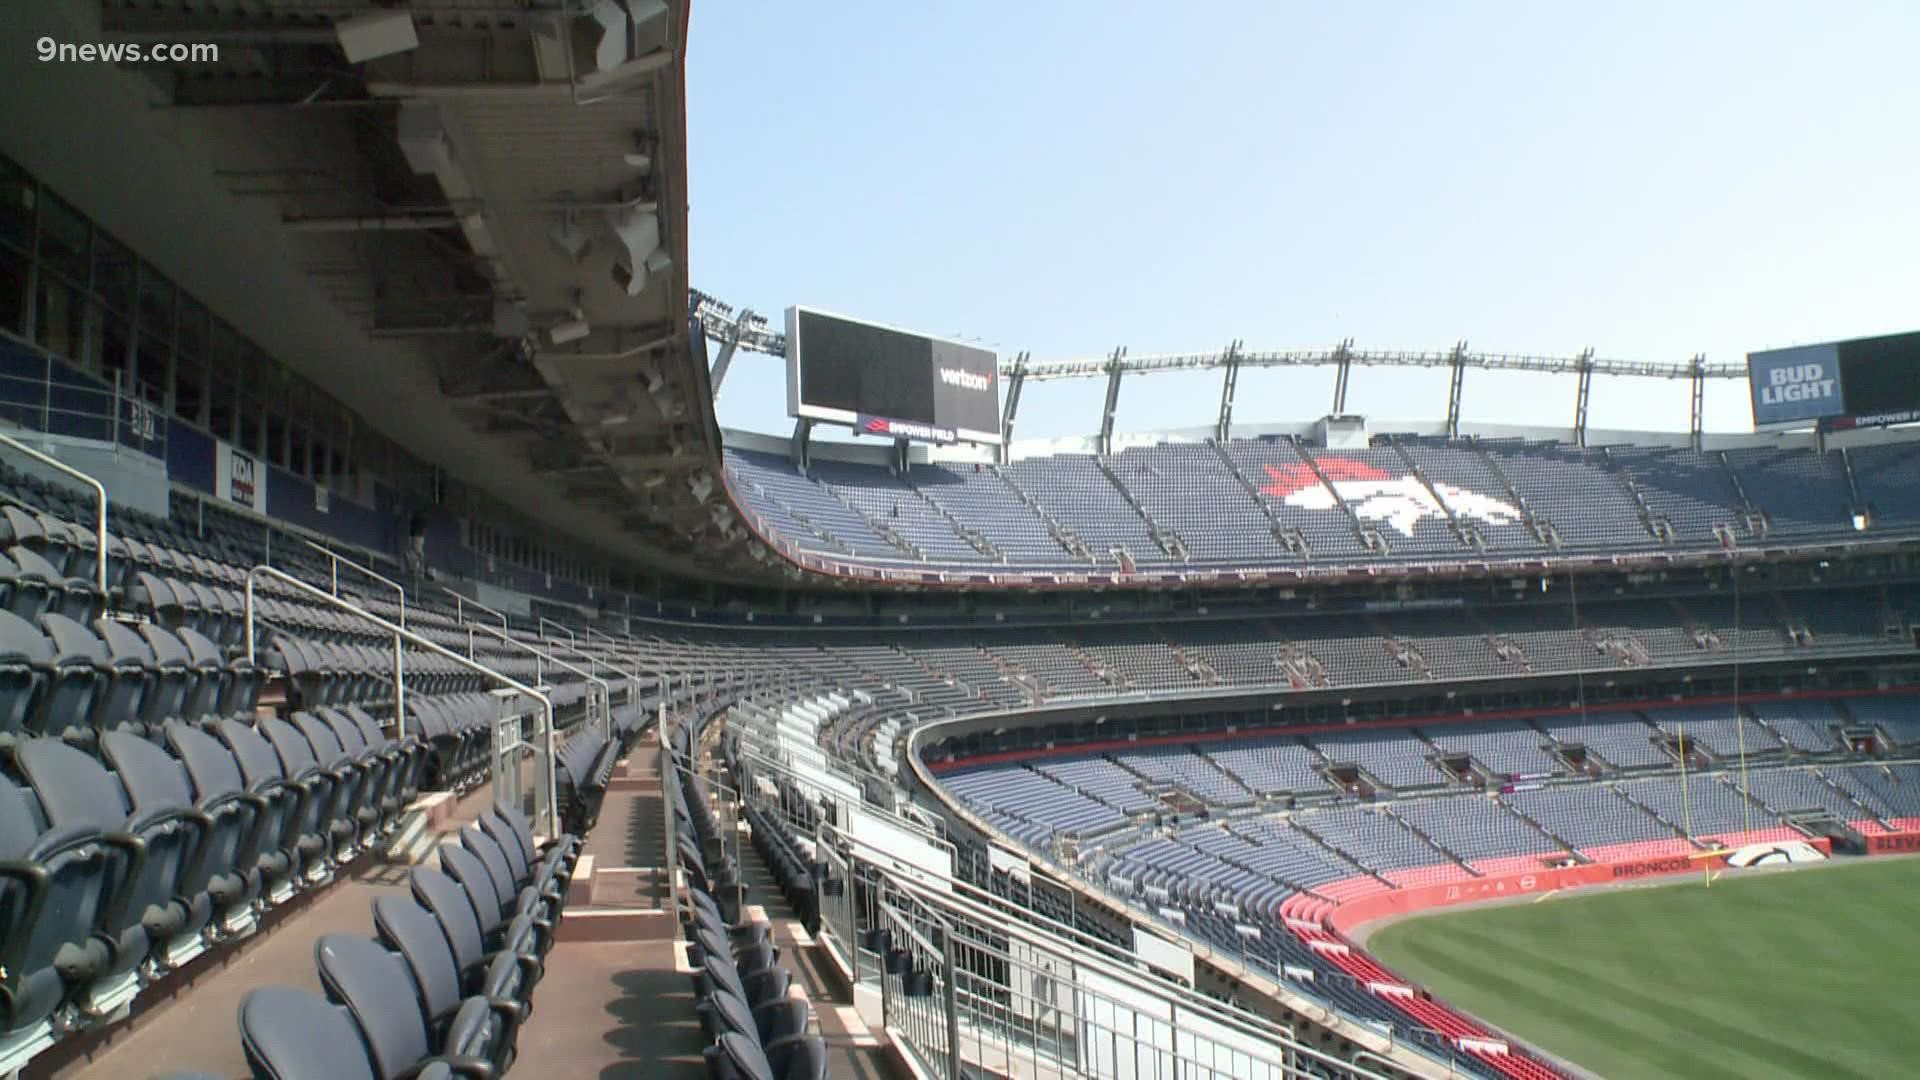 When the Broncos host the Los Angeles Rams it will be the first time the stadium is open at full capacity for a Broncos game since December 29, 2019.